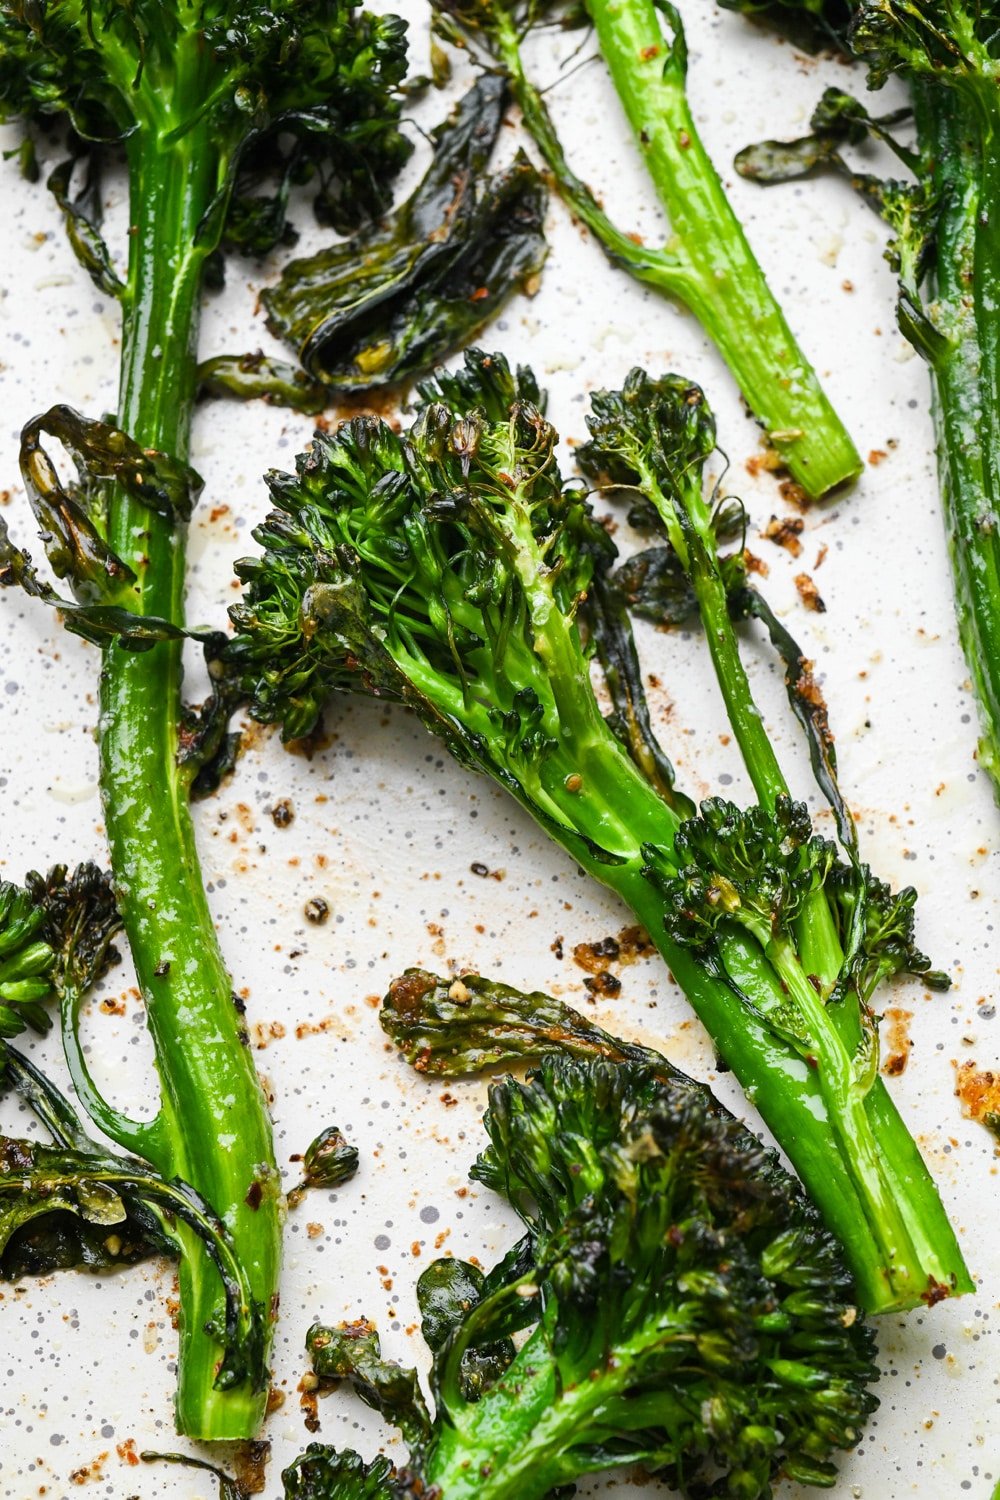 How to make roasted broccolini: Roasted broccolini stalks on sheet pan right after coming out of the oven. The broccolini is bright green with bits of charred pieces.